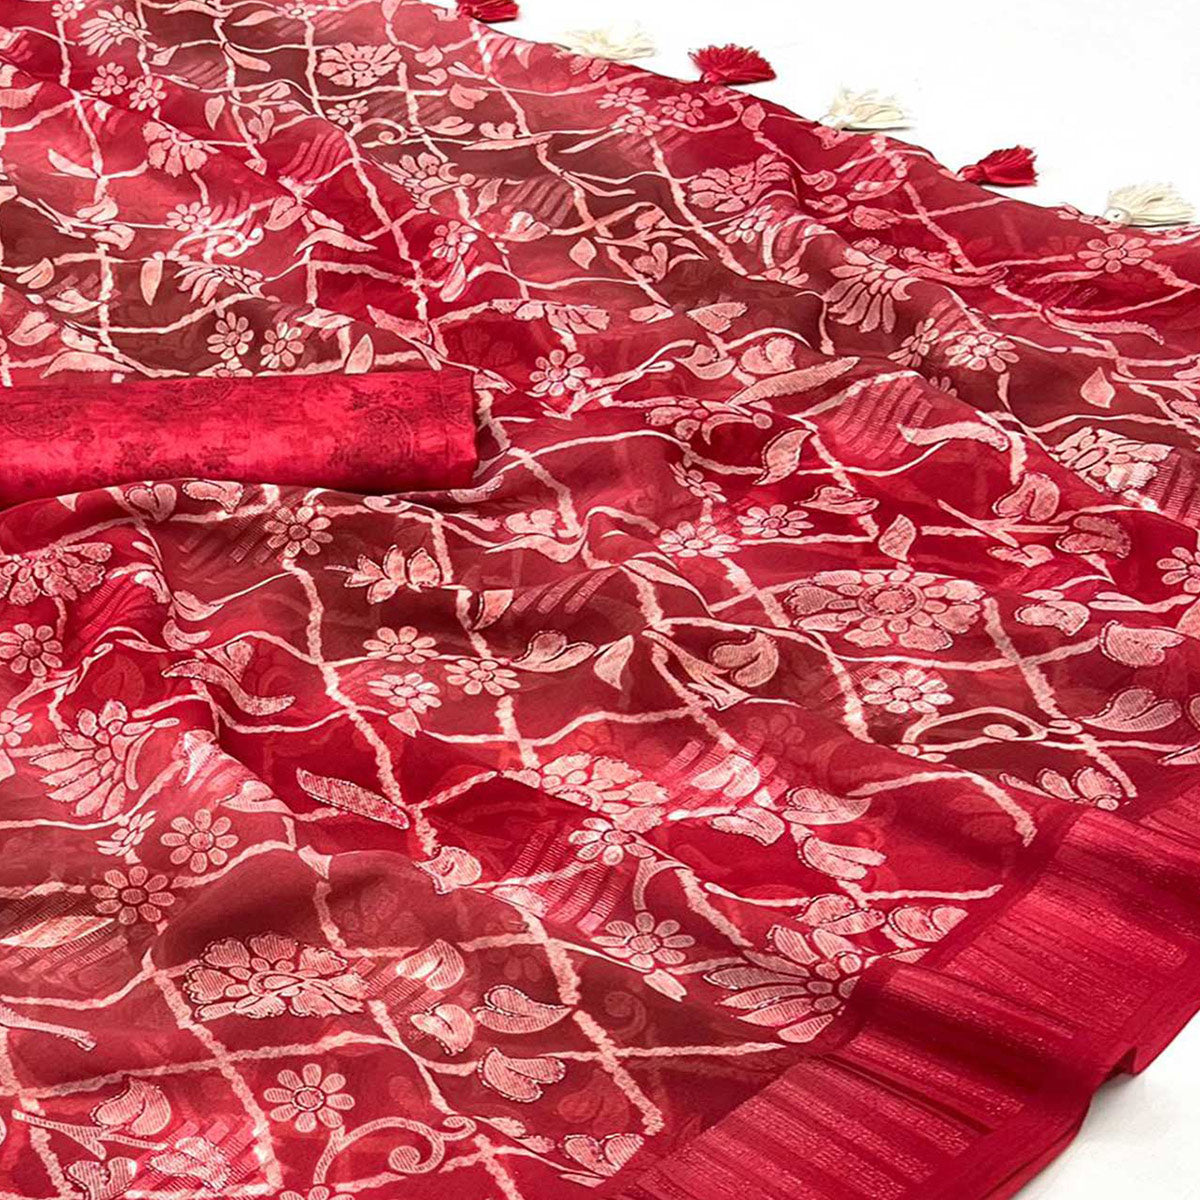 Red Floral Foil Printed Georgette Saree With Tassels